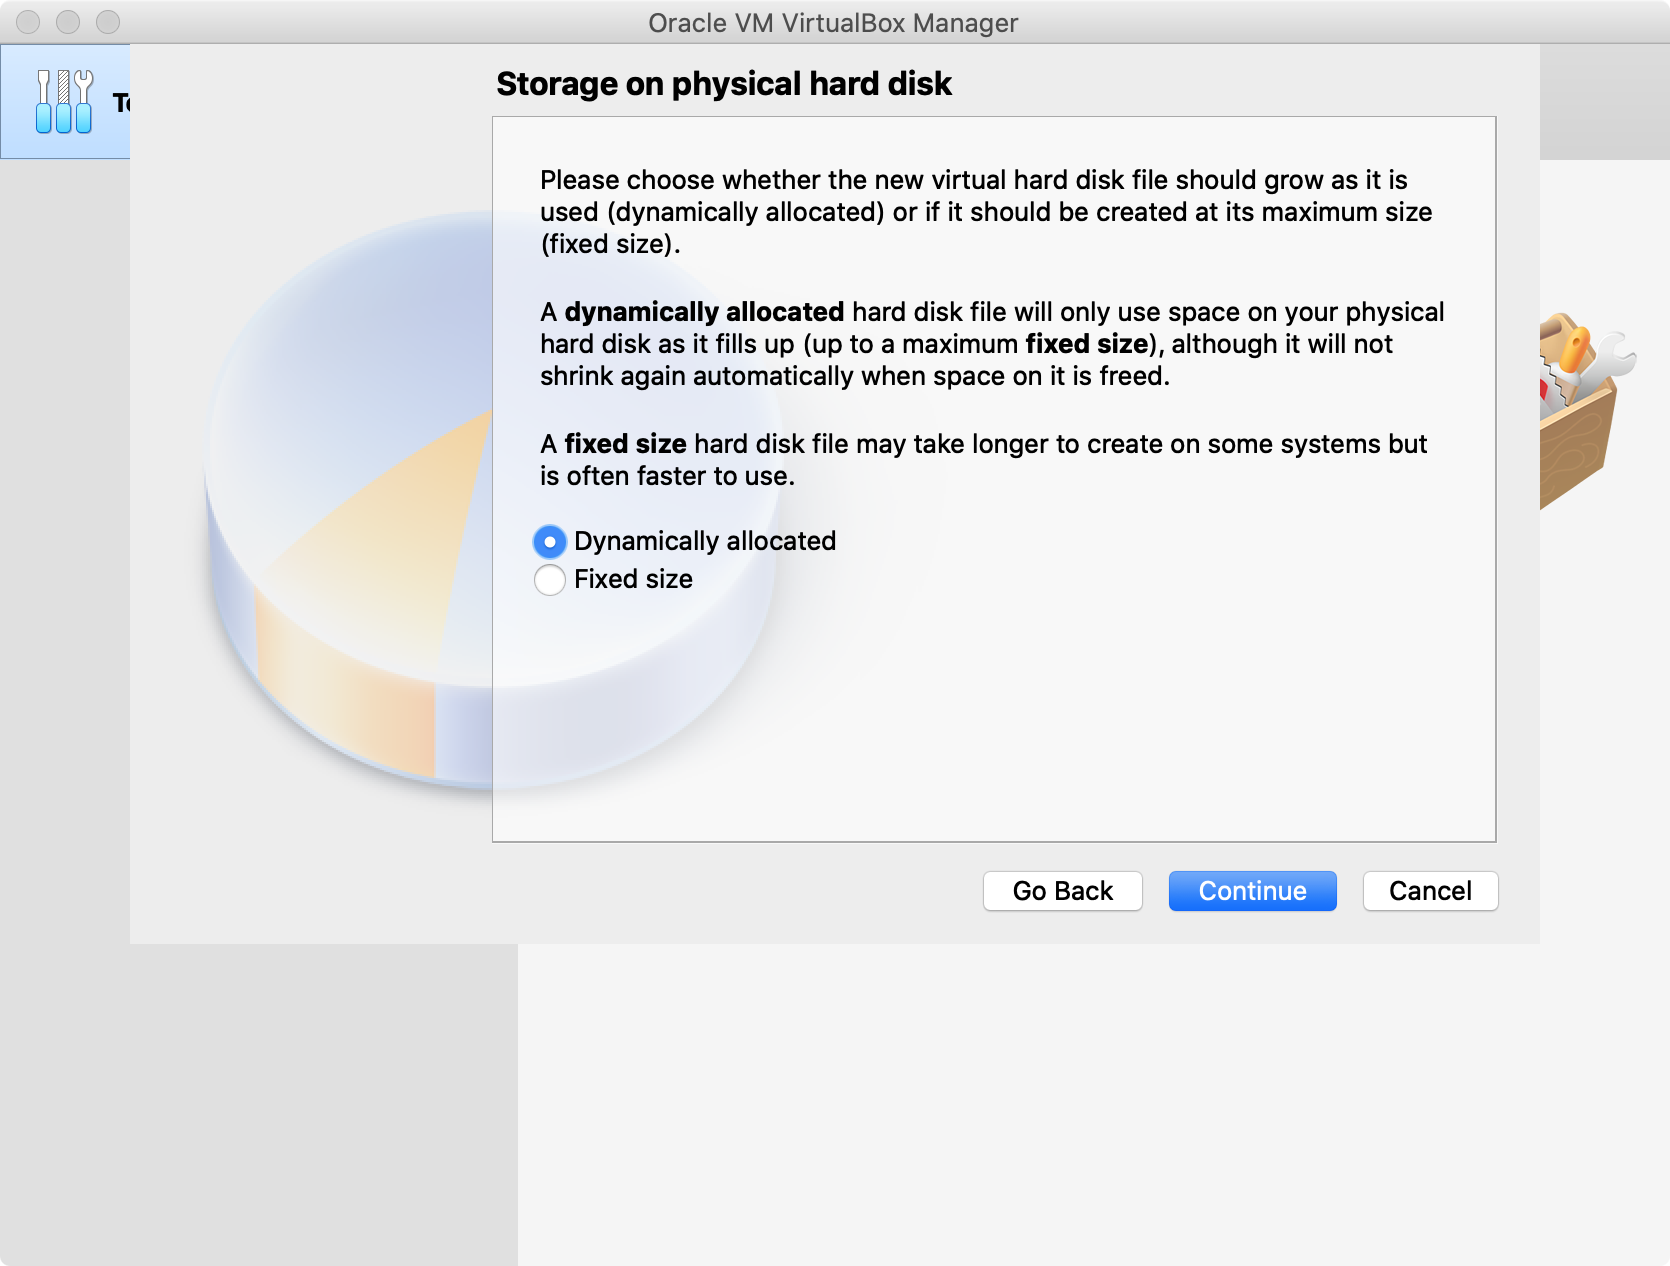 Storage on physical hard disk